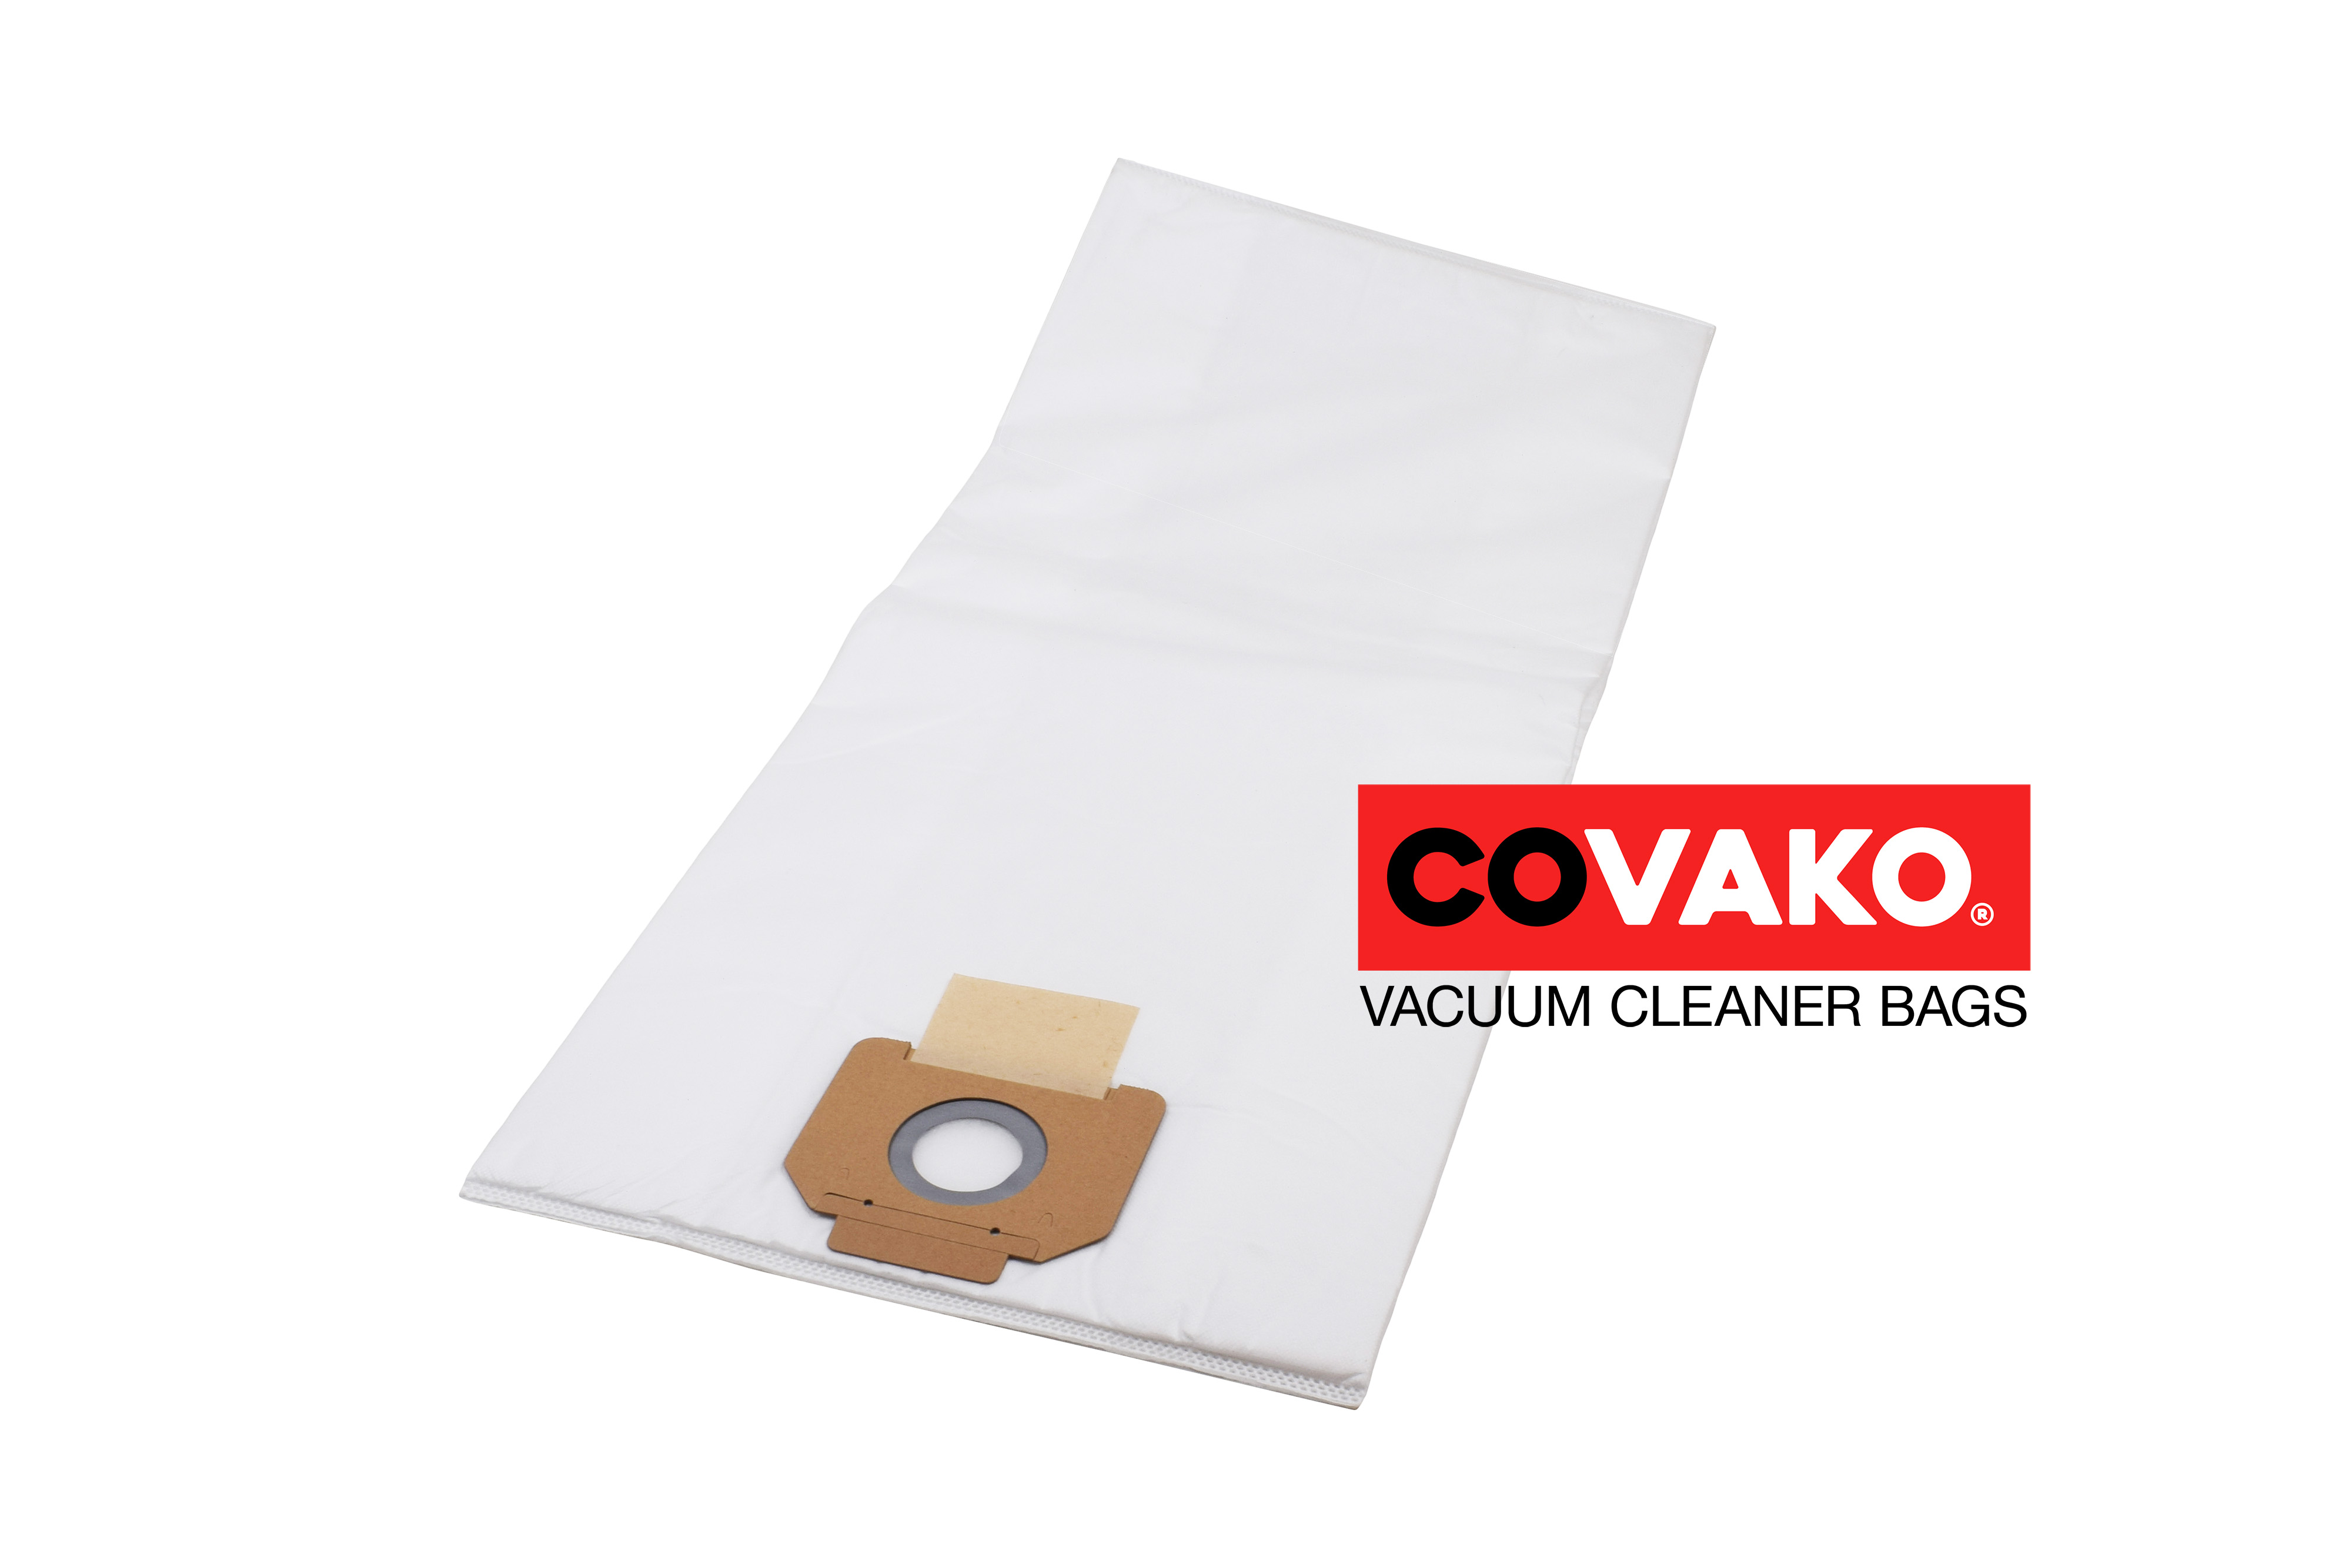 DiBo Windly 429 M FM IPC / Synthesis - DiBo vacuum cleaner bags